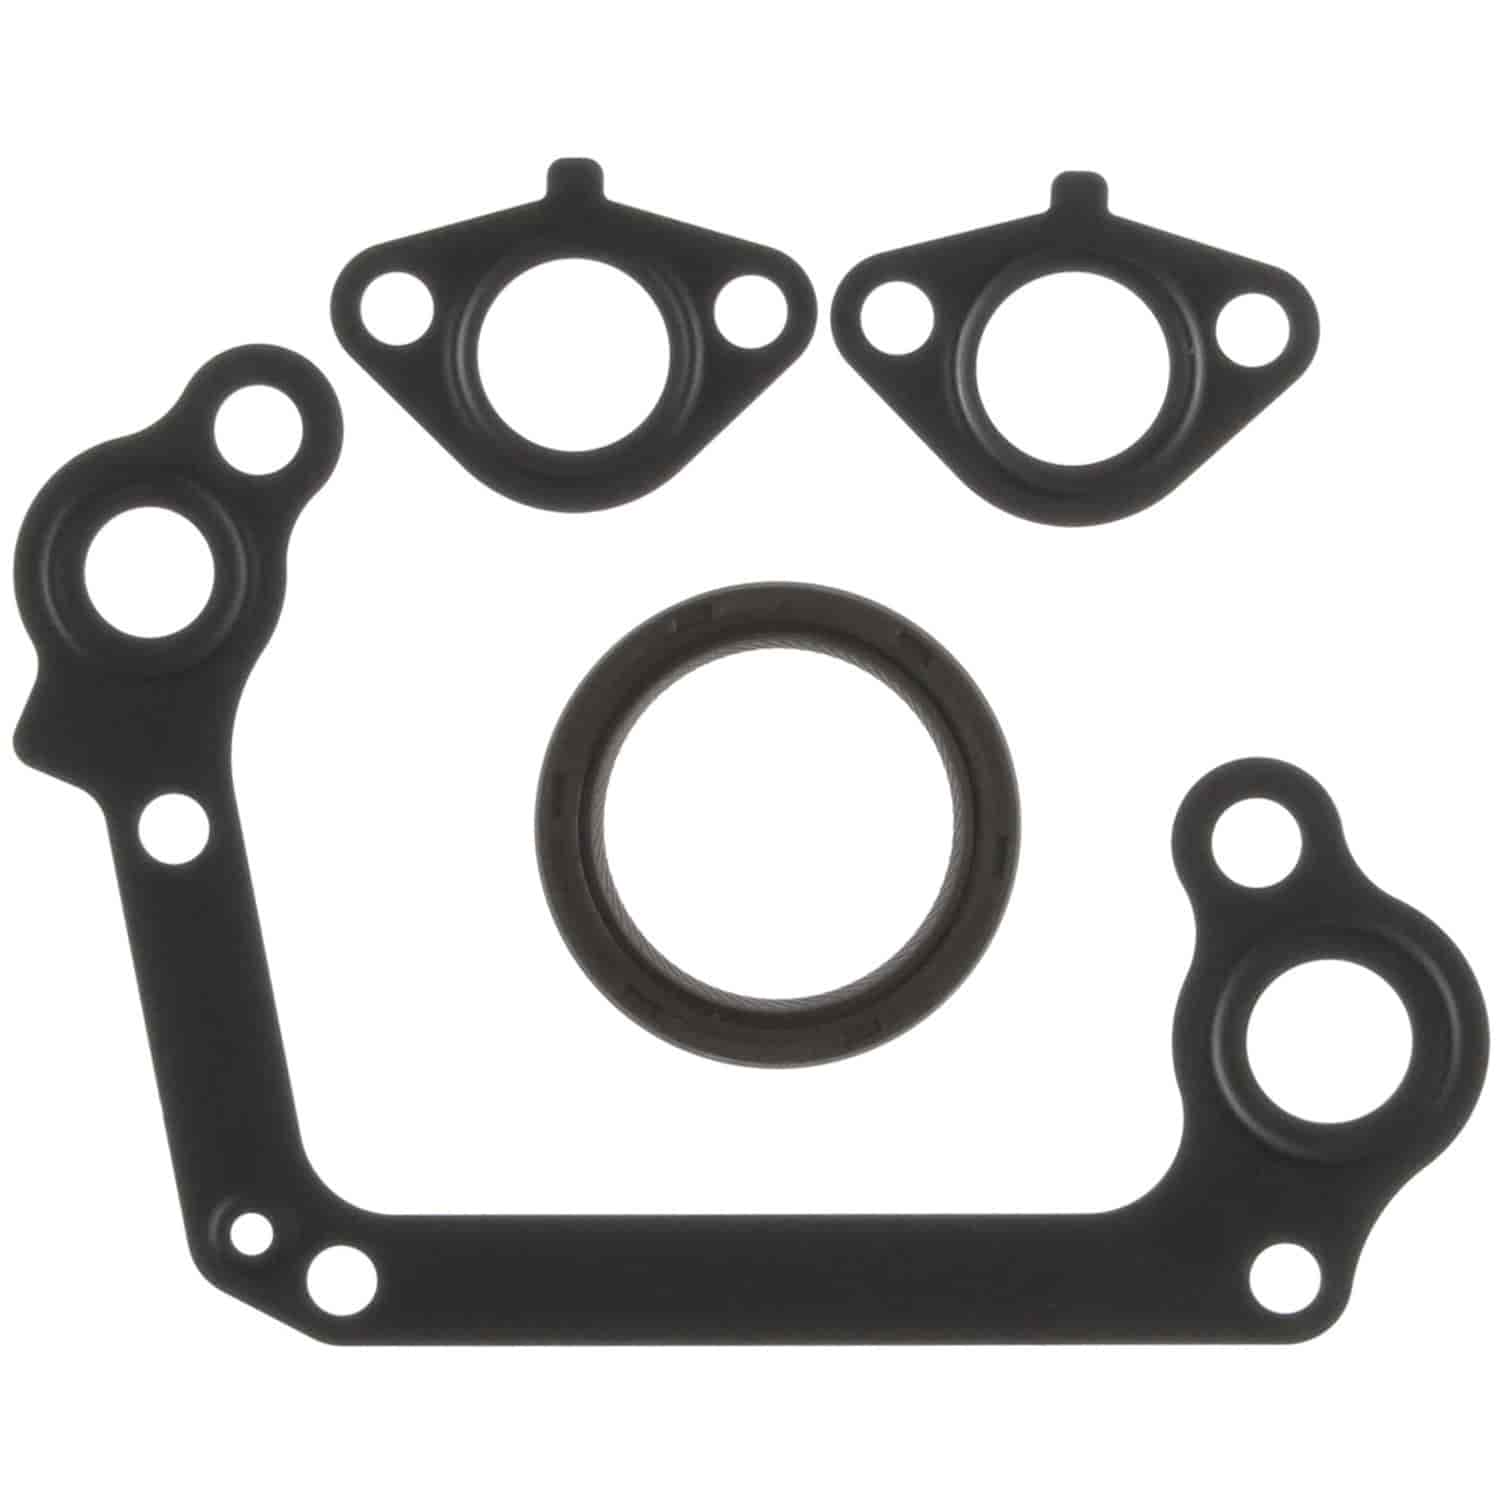 Timing Cover Set Toyota-Pass 1.8L 1ZZFE 1998-2003